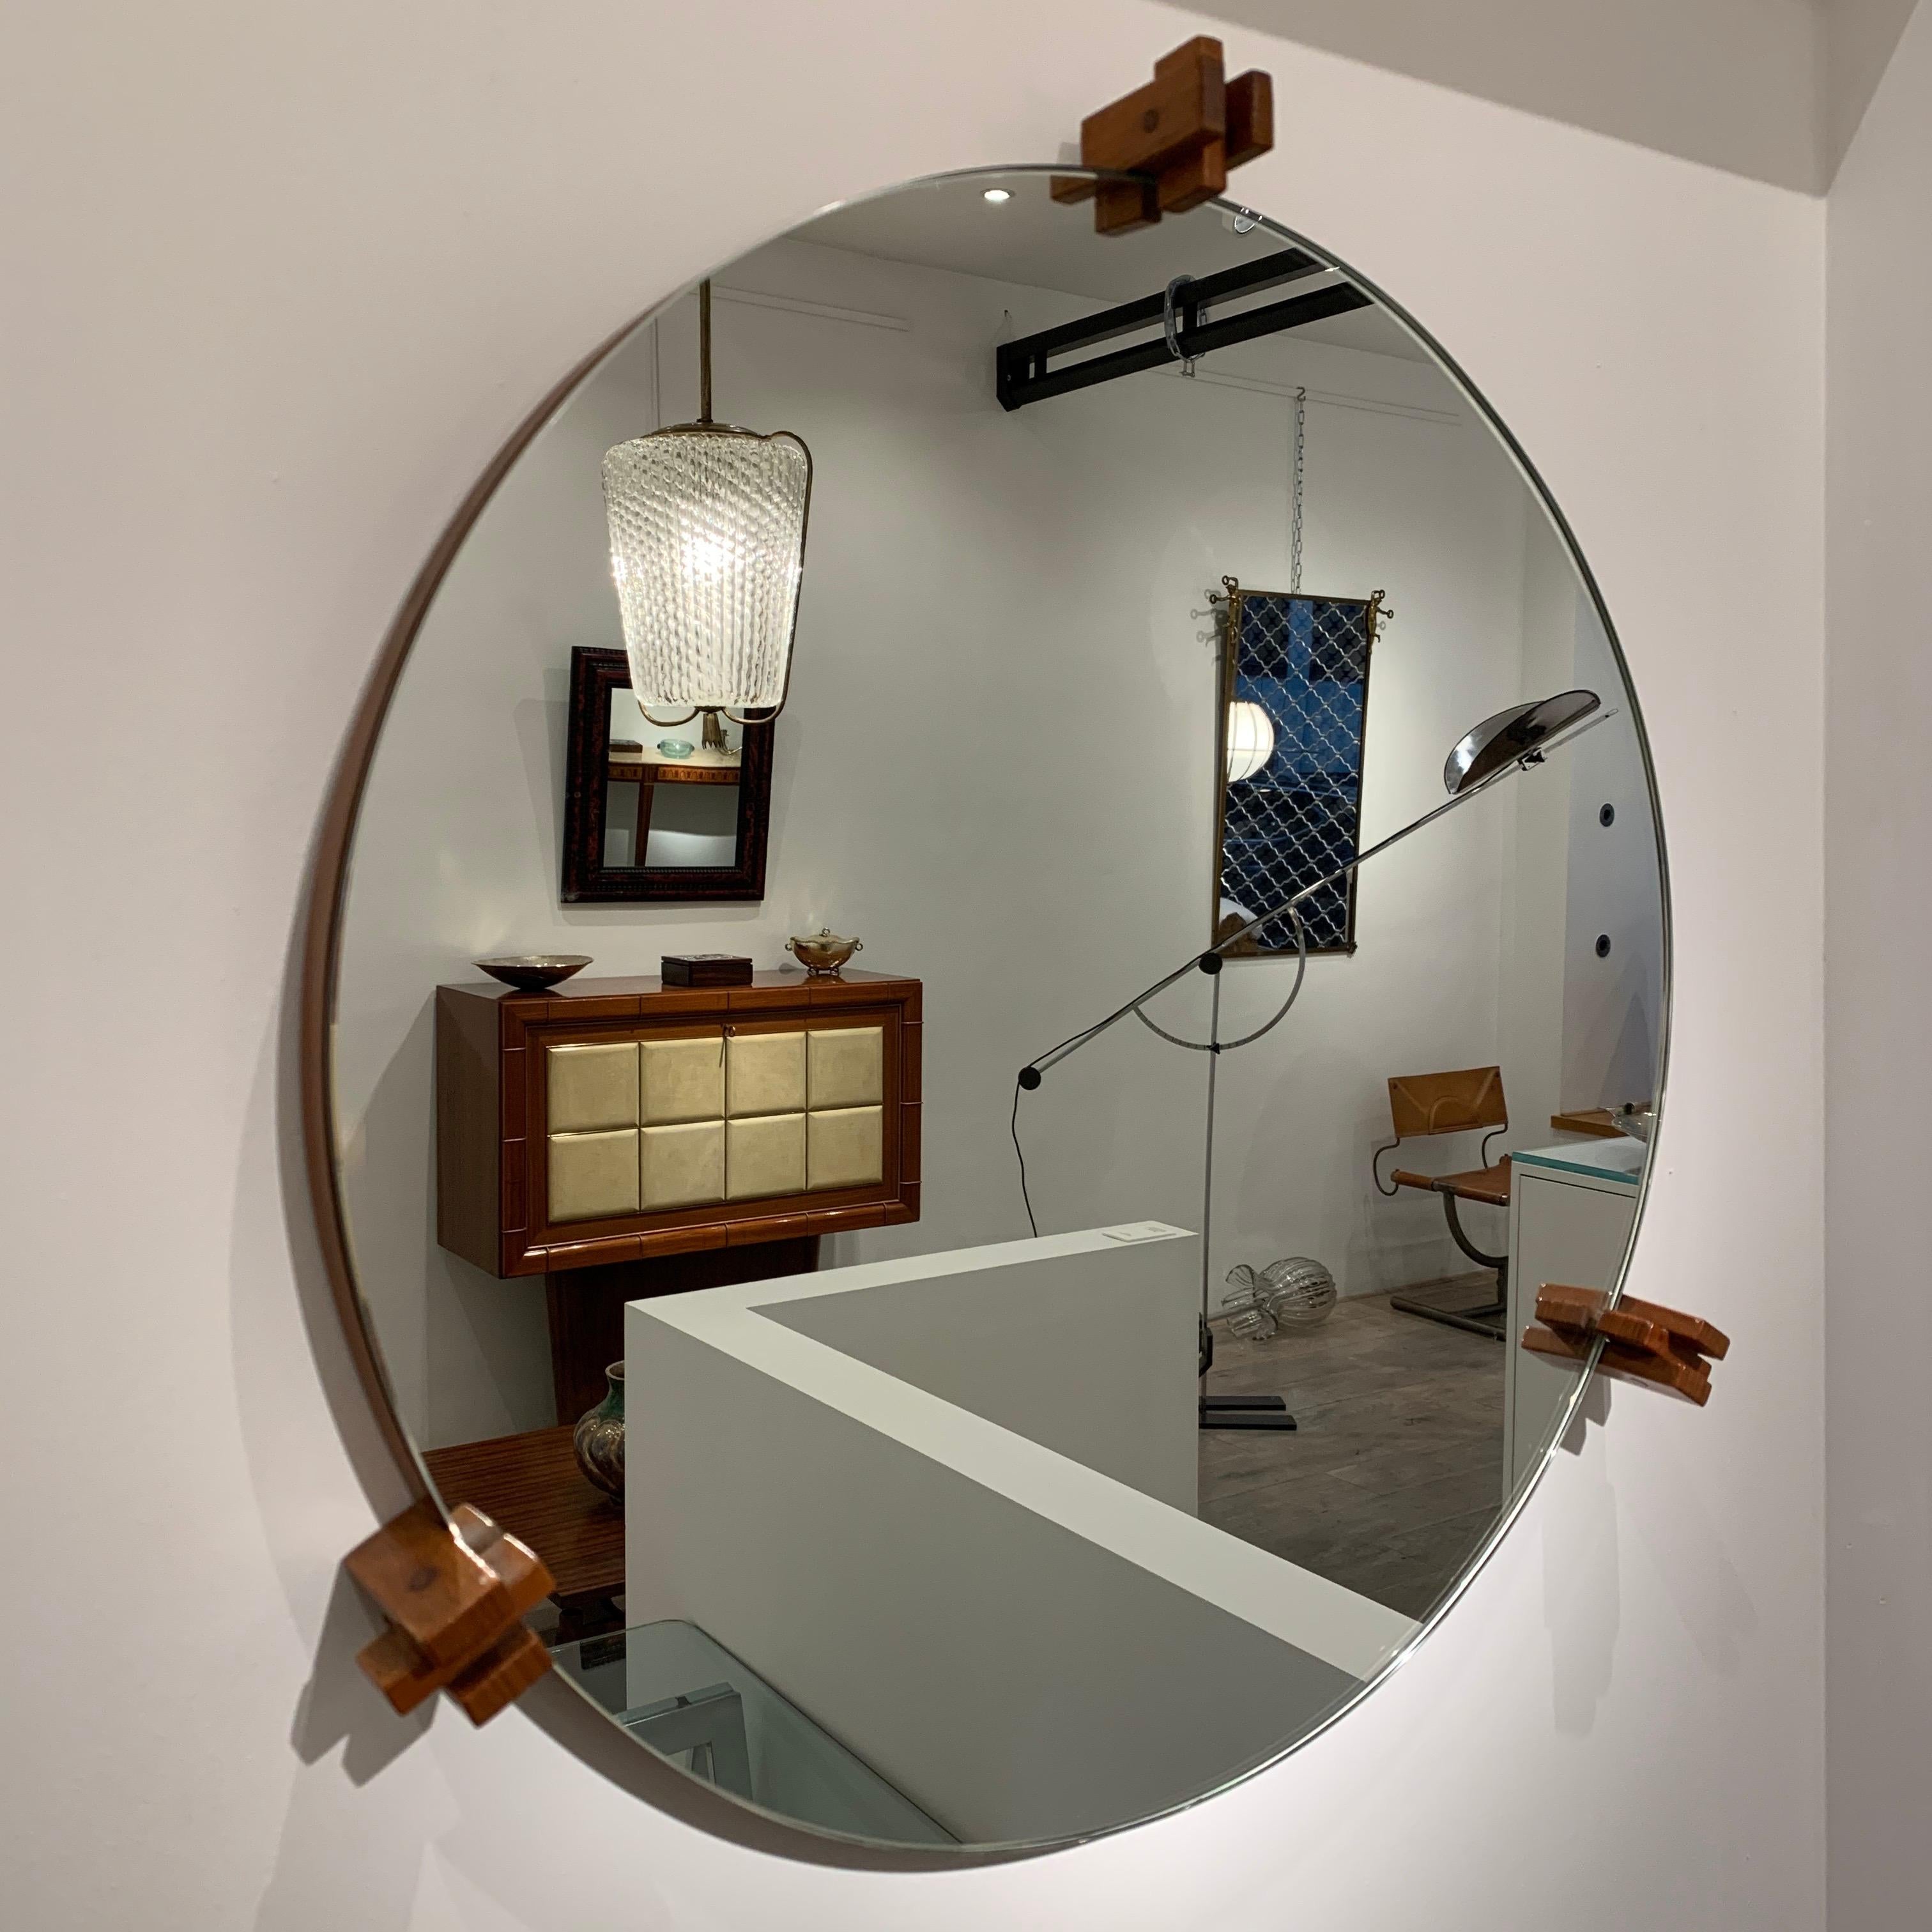 The design of the mirror is reduced to its basic function. The only decorative parts are the three wood structures that hold the mirror. This work is in the spirit of an architect like Gianfranco Frattini. It clearly shows the influence for simple